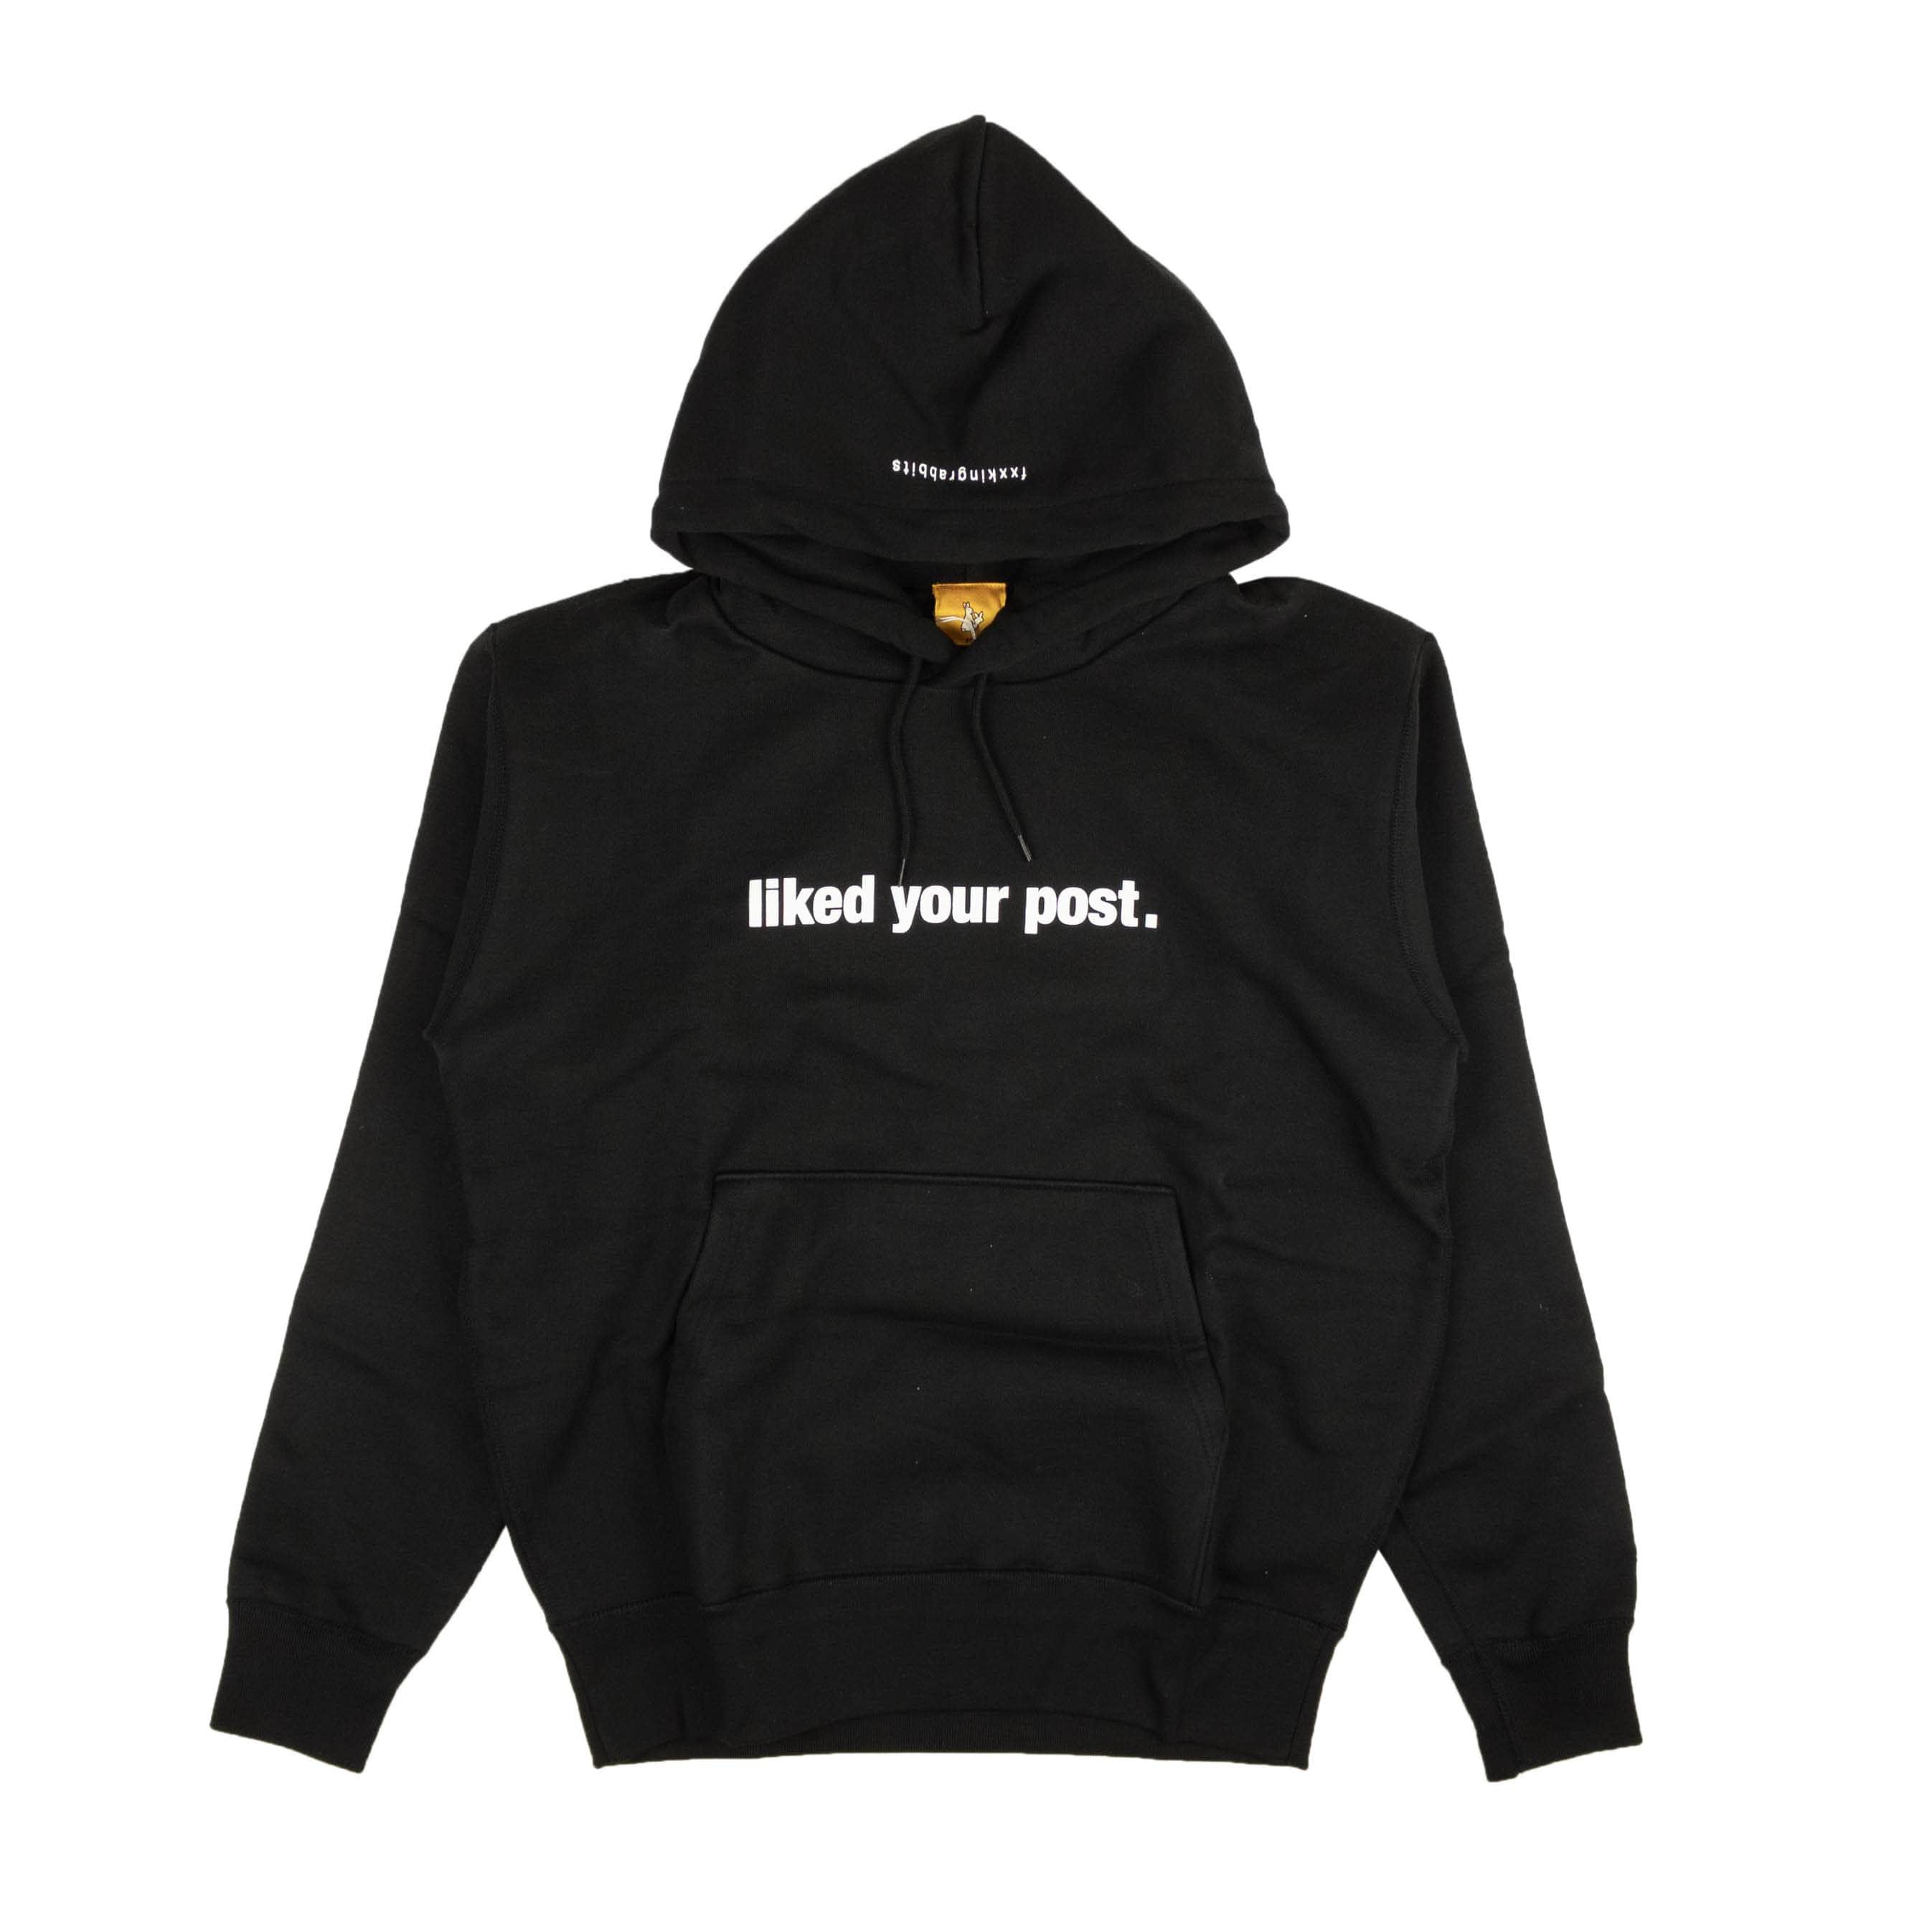 FR2 channelenable-all, chicmi, couponcollection, fr2, gender-mens, main-clothing, mens-shoes, size-m, size-s, under-250 Black Liked Your Post Hoodie